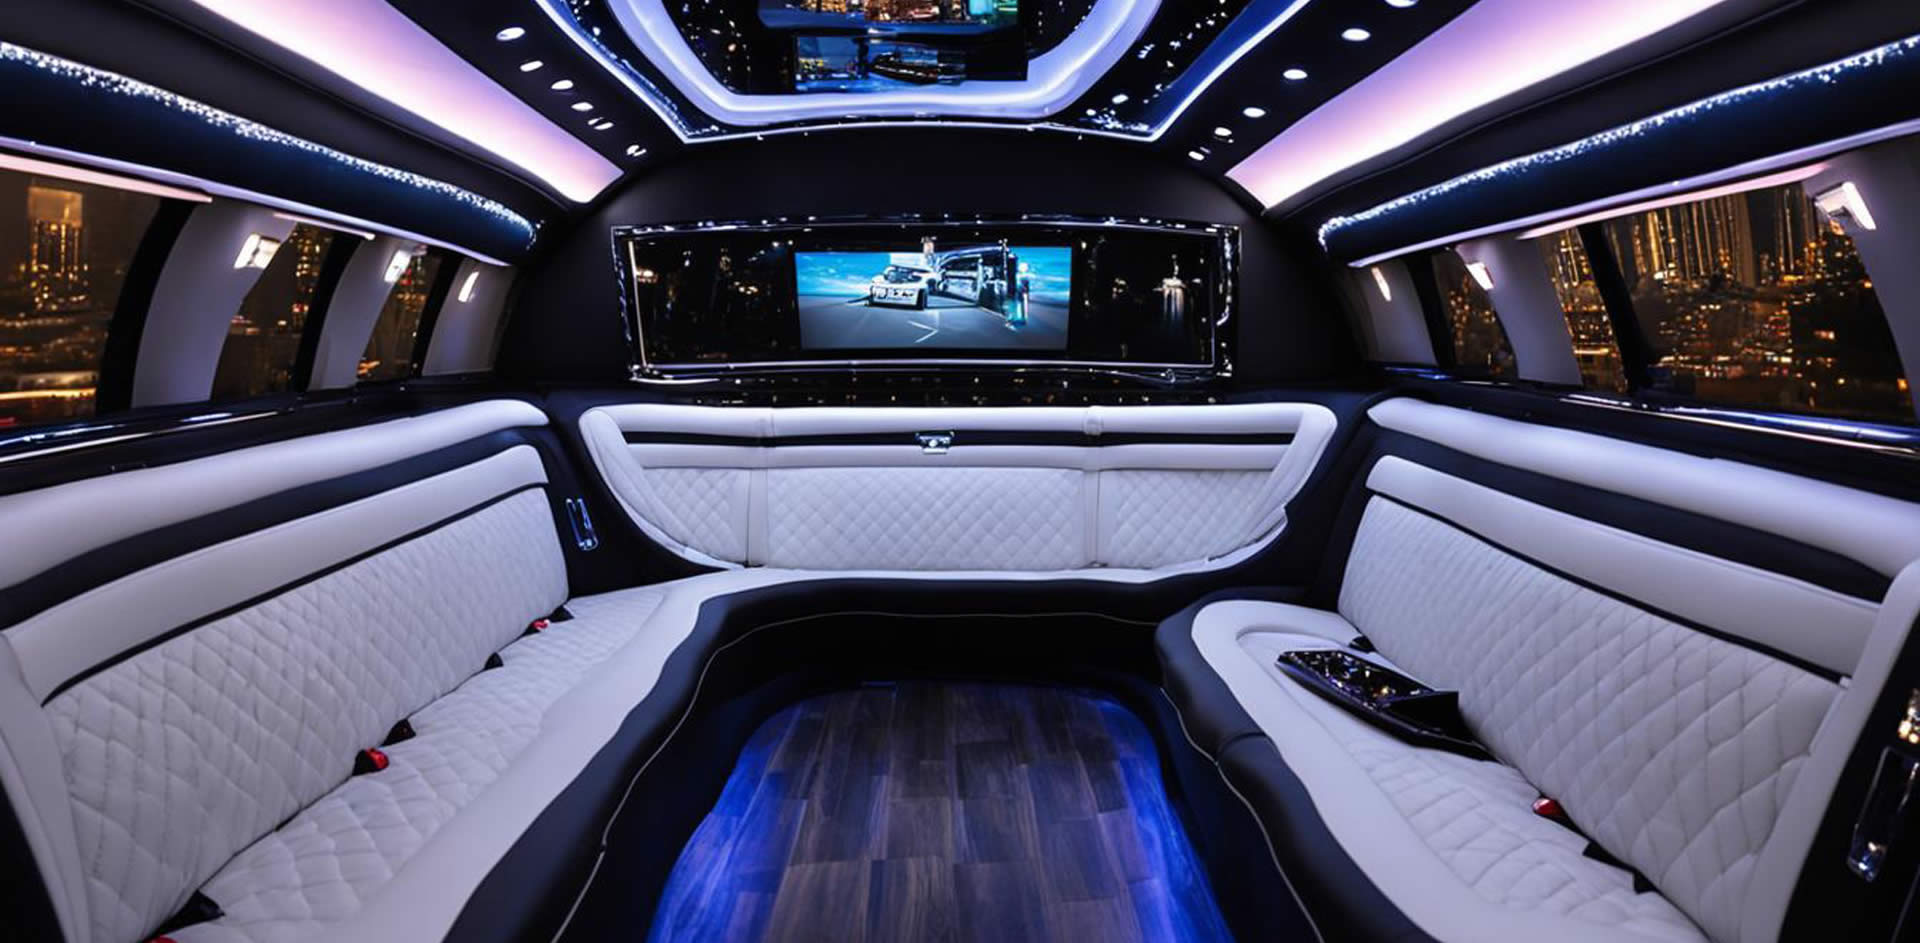 Limo Service in Glendale